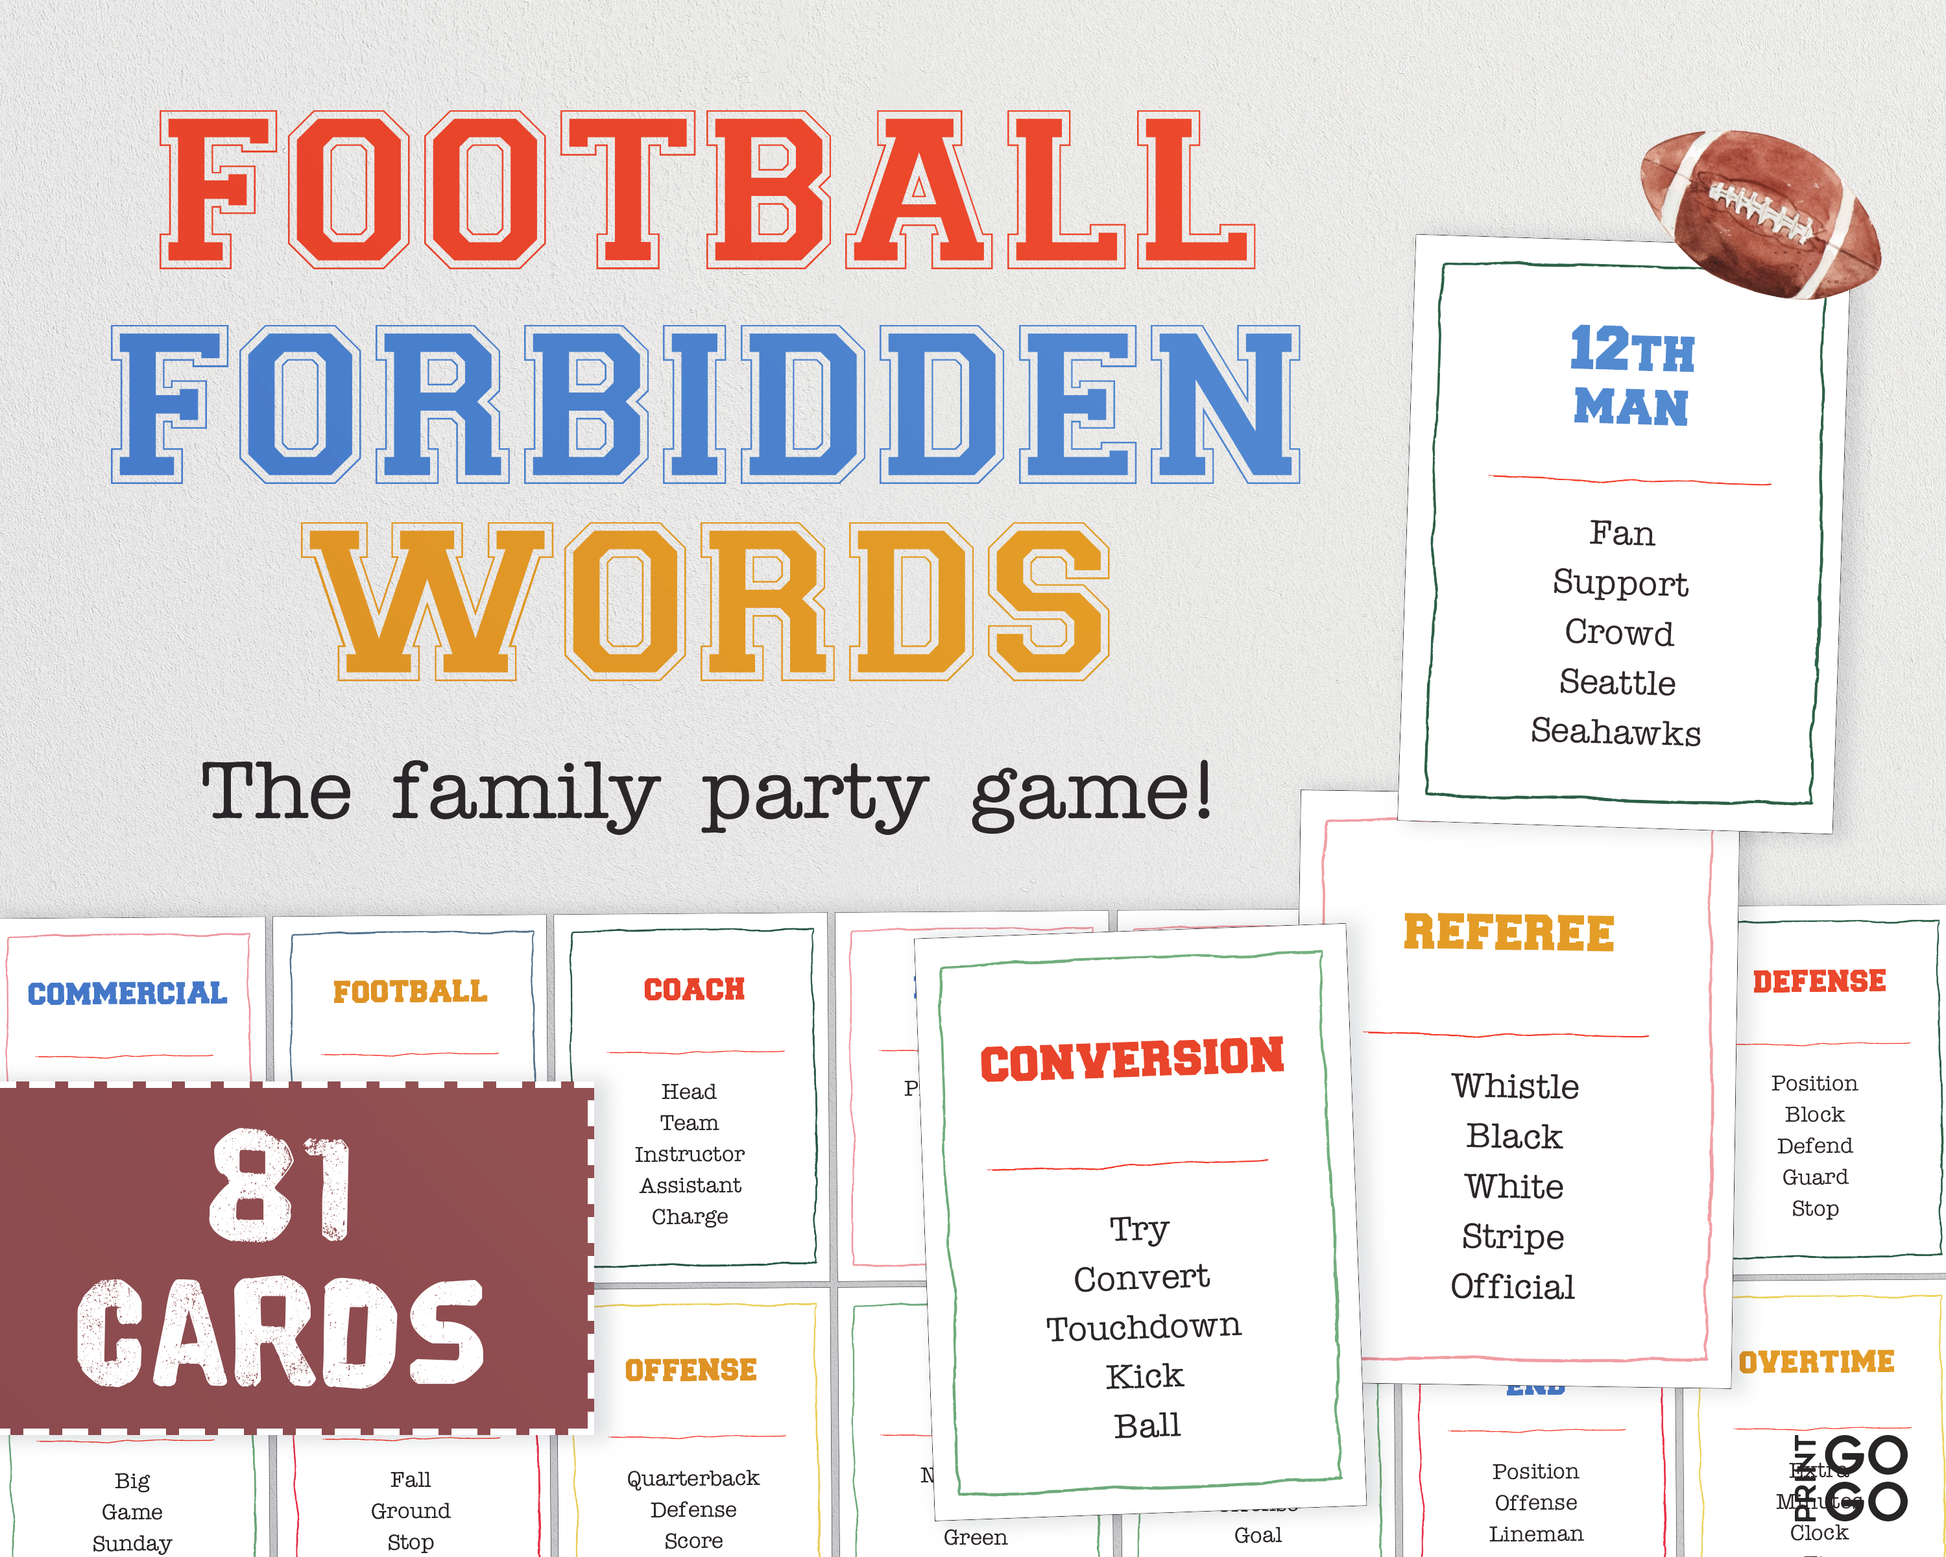 The Big Game Bundle - American Football Party Games For All The Family | Sports Games | Trivia Quizzes, Friendly Feud and Forbidden Words!